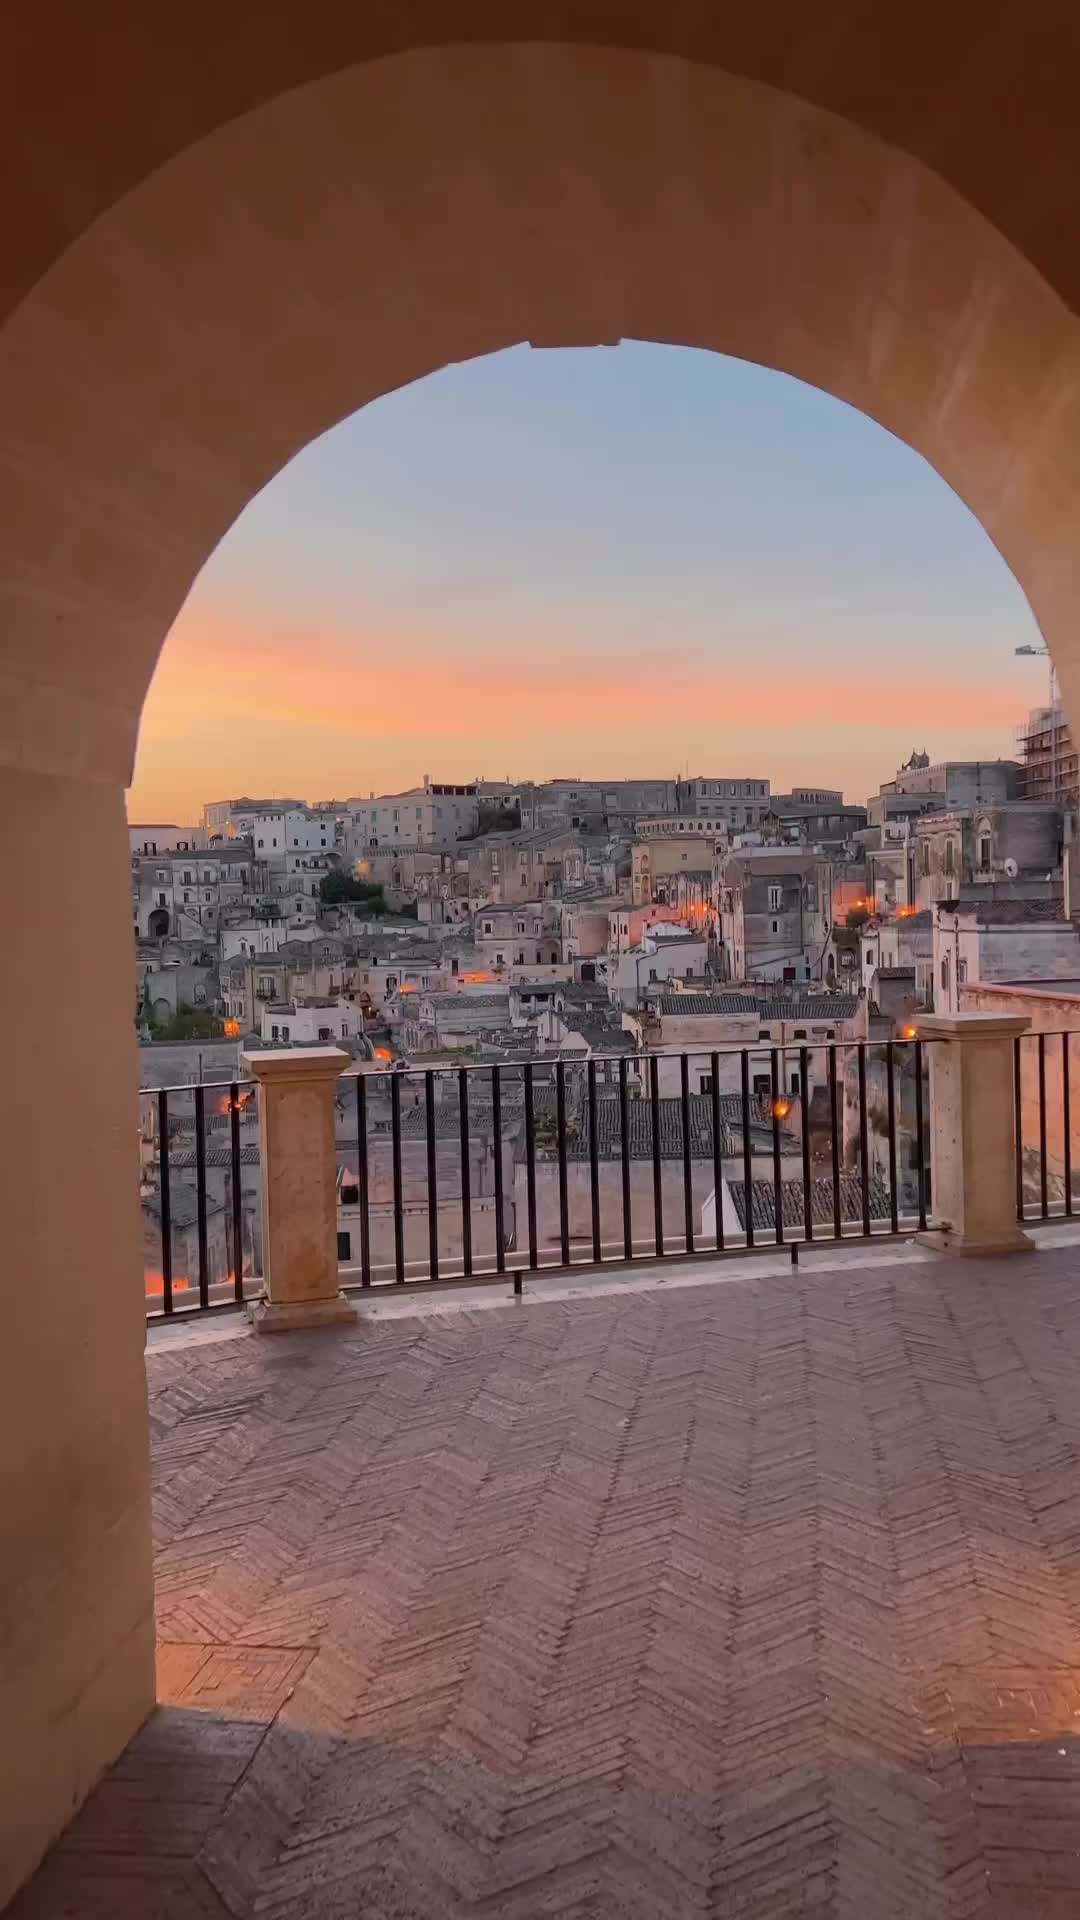 Sunrise in Matera, Italy - A Stunning Morning View